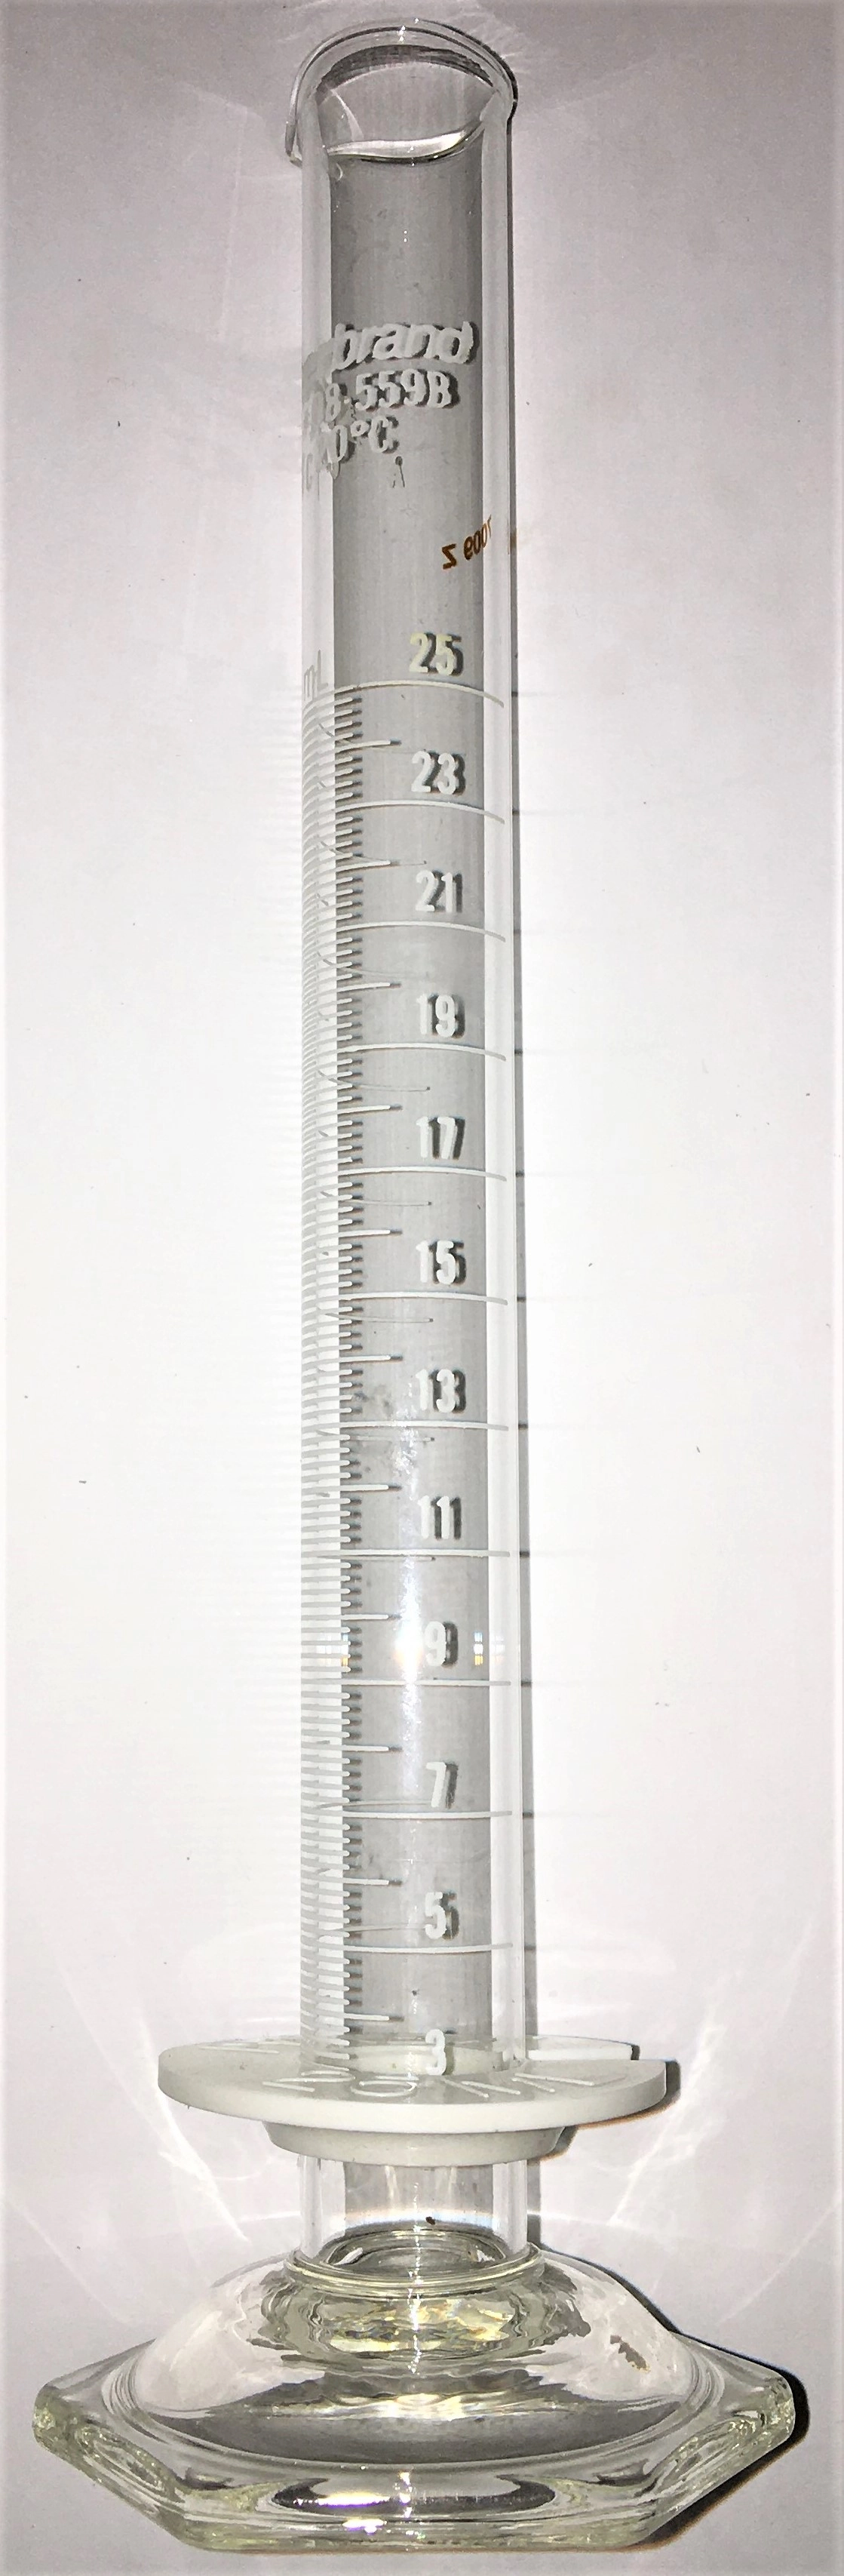 Fisherbrand 08-559B Serialized Graduated Cylinder - Class A (25mL)